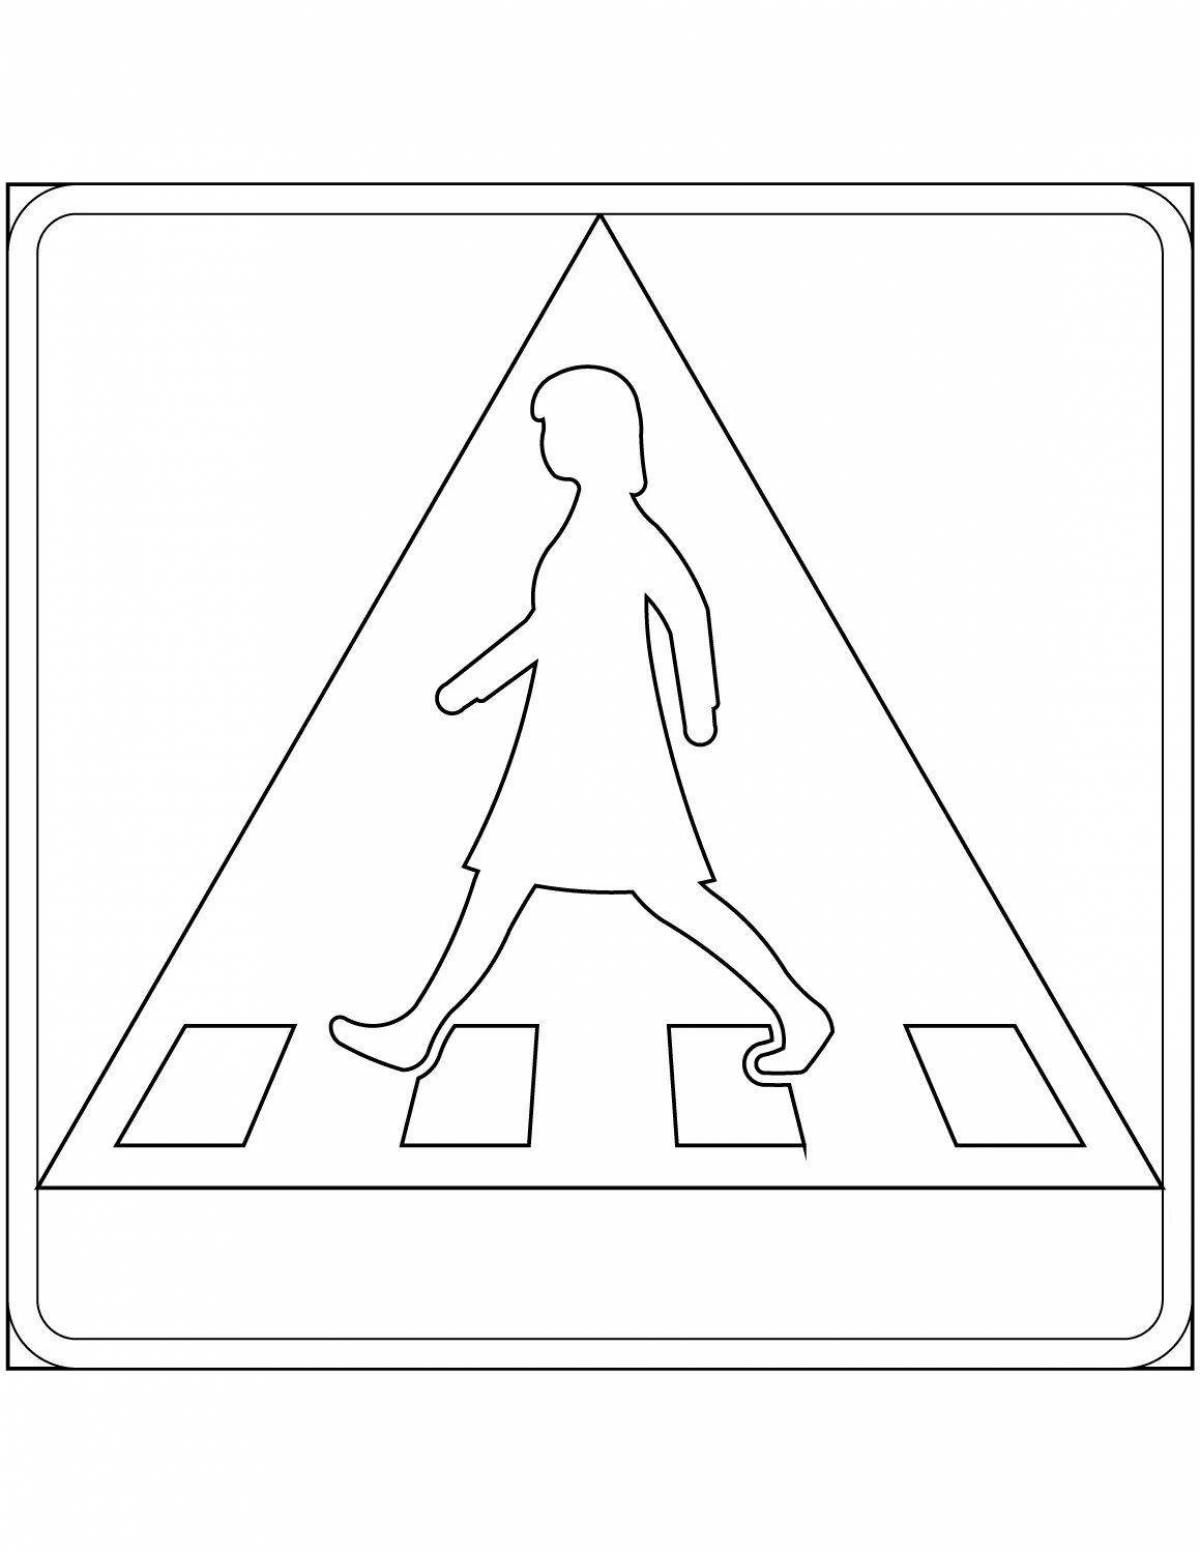 Colorful walking path coloring page